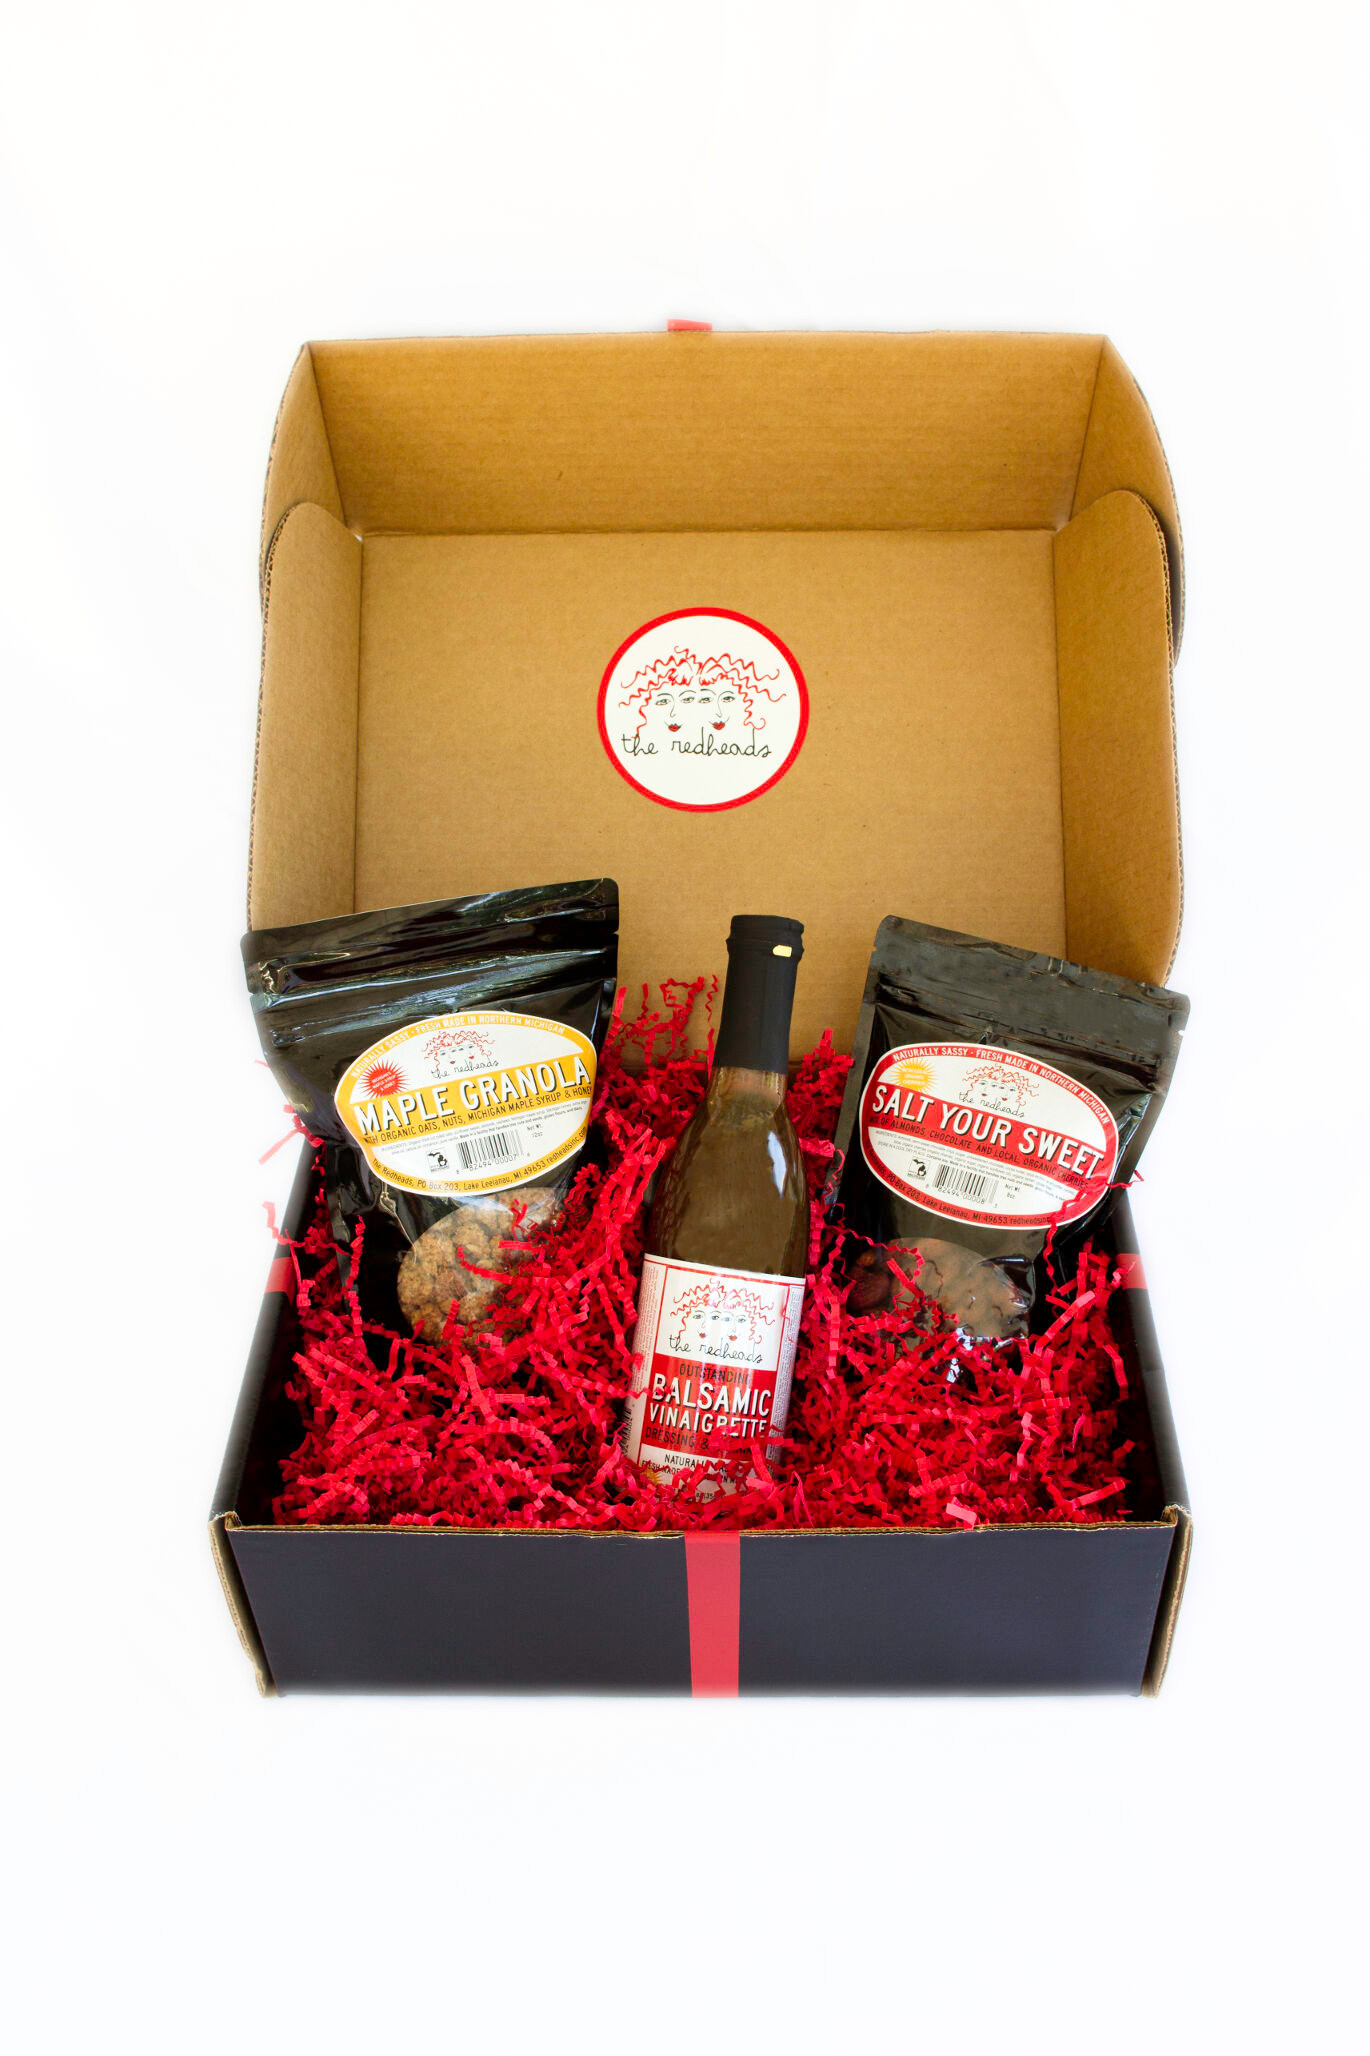 Simply Sassy Gift Box - The Redheads